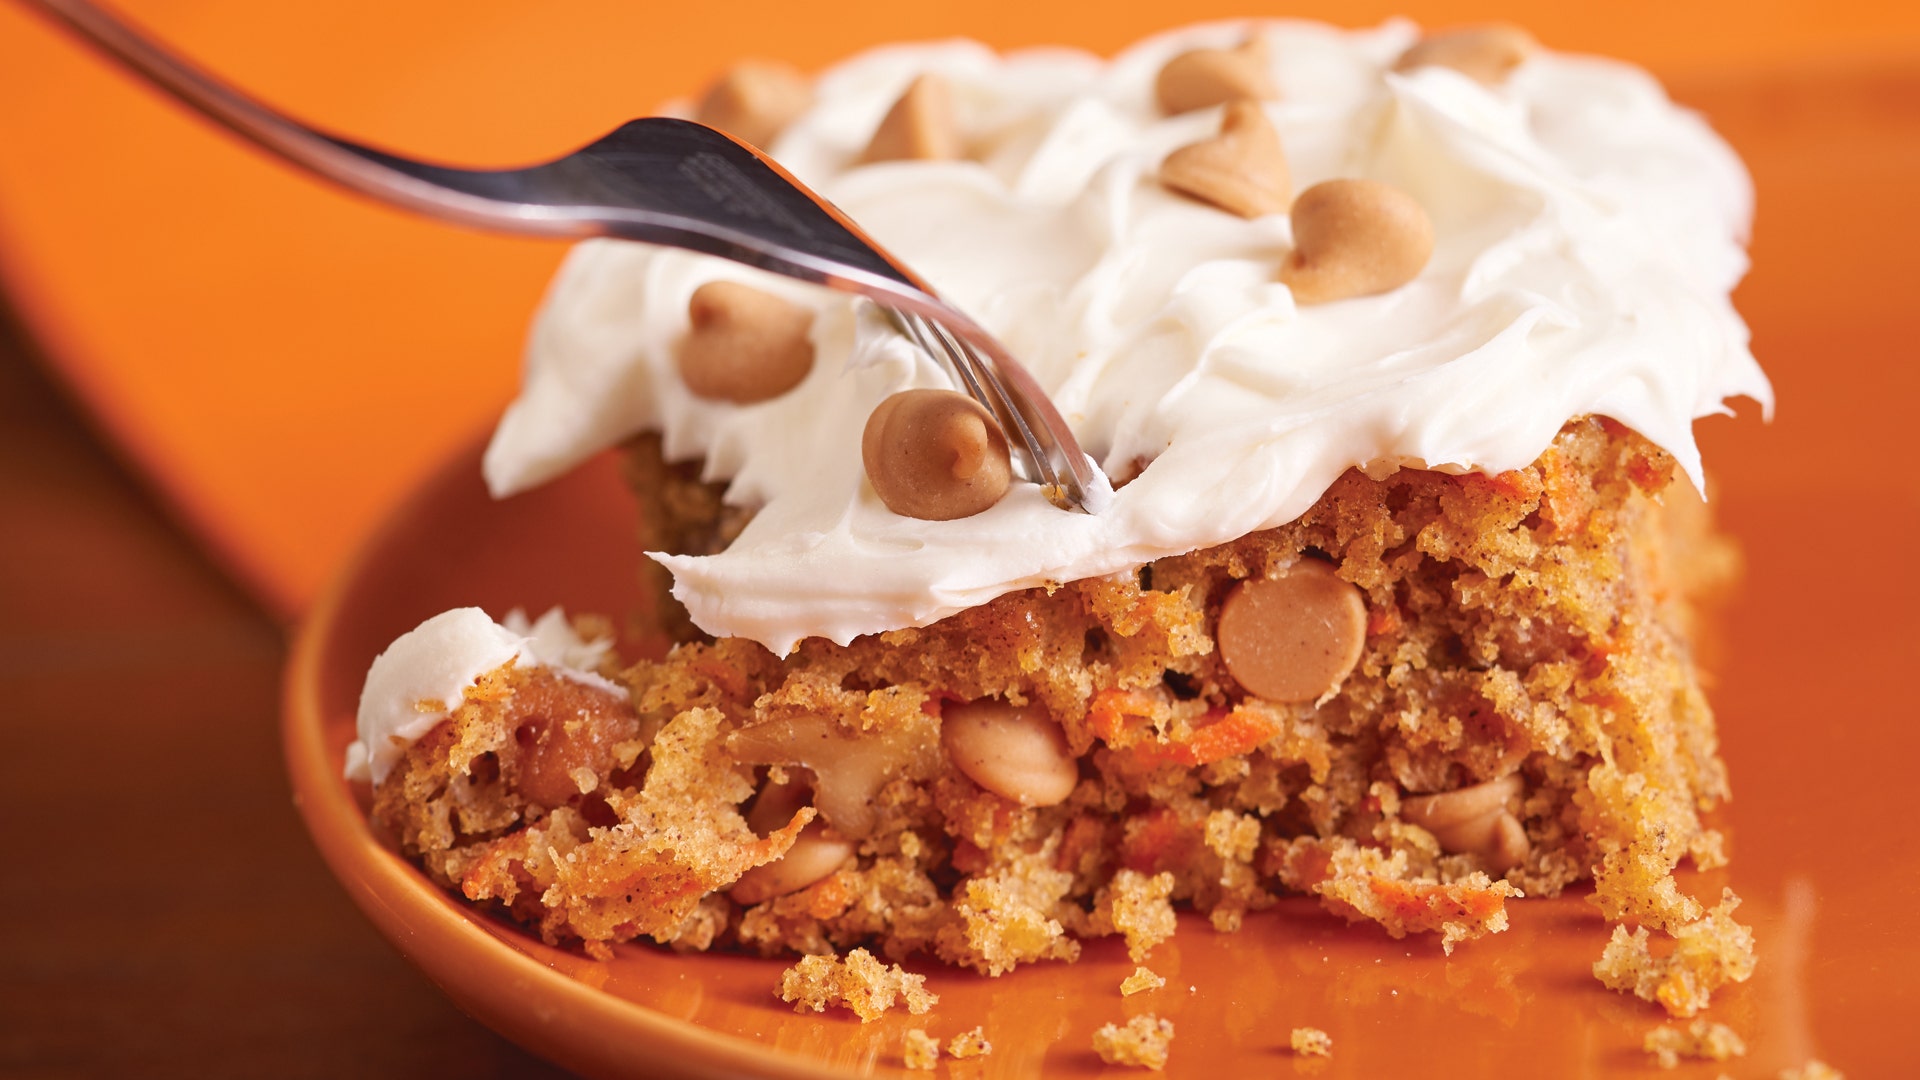 Mouthwatering Carrot Cake